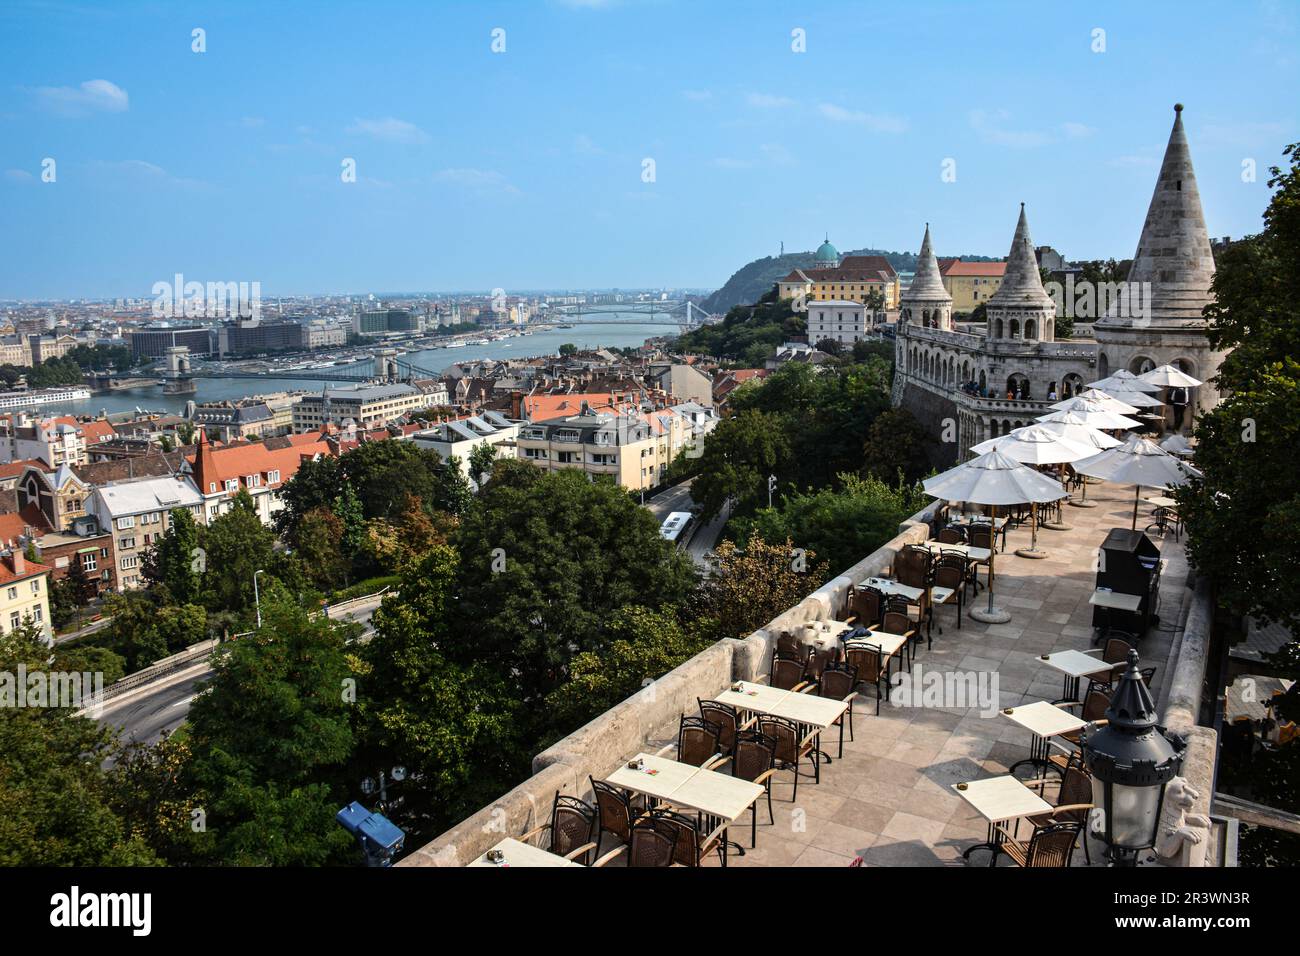 Terrace and Towers of the Fisherman's Bastion with a View to the Danube River - Budapest, Hungary Stock Photo